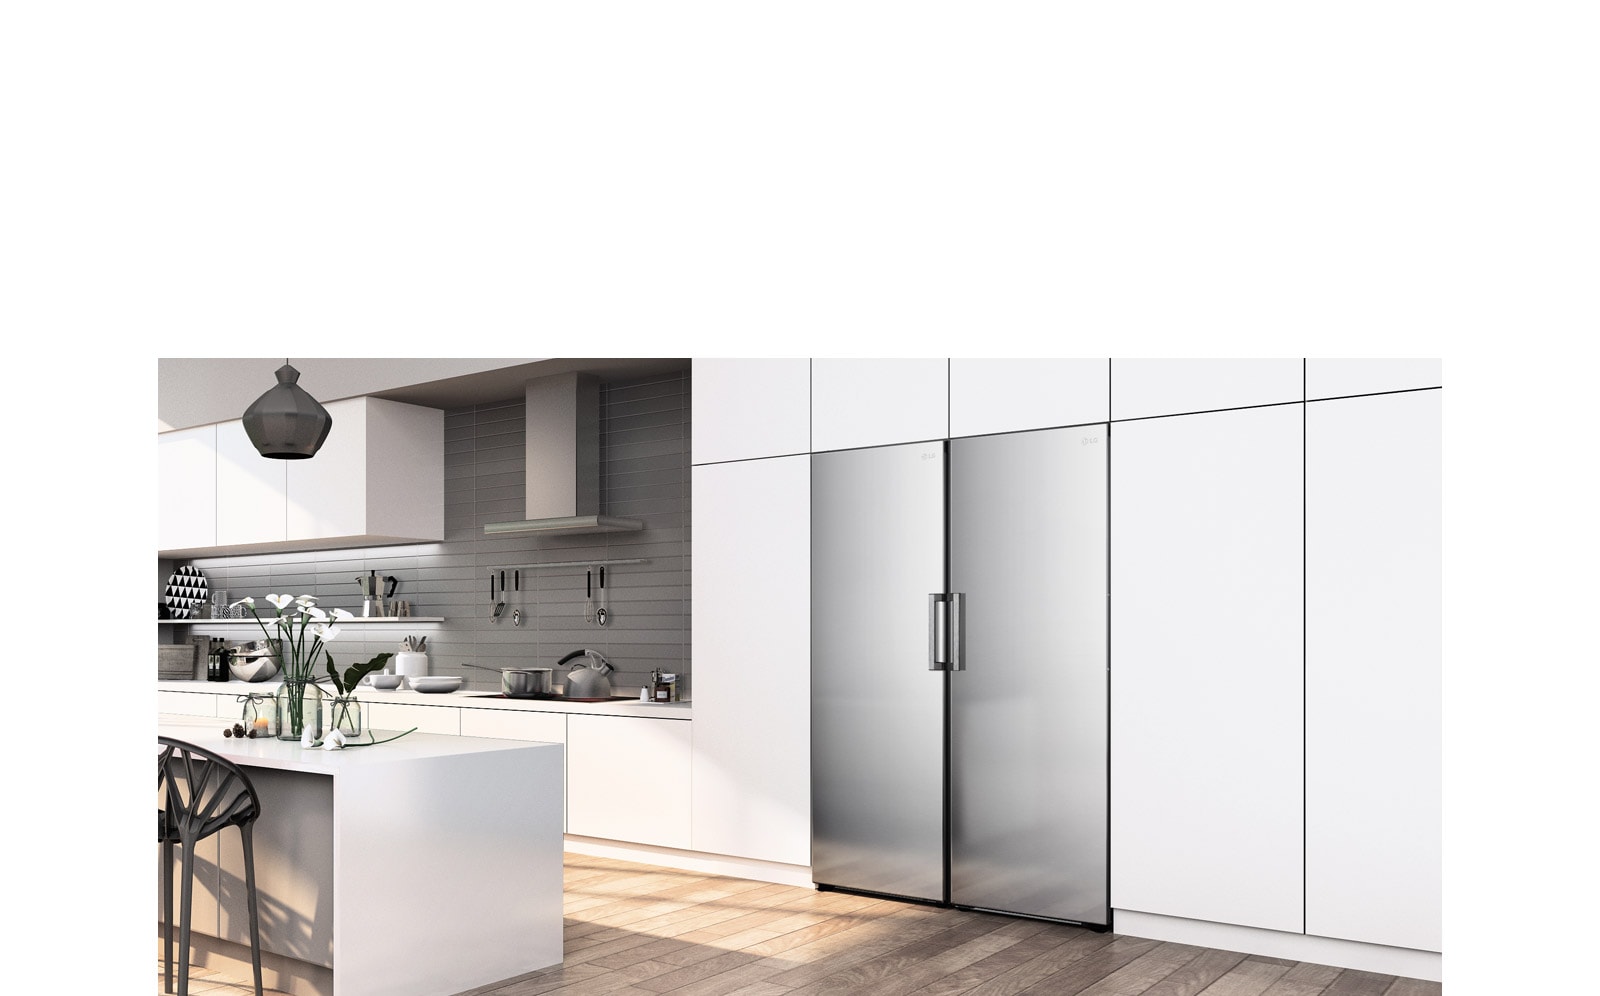 The refrigerator is seen seamlessly fitting into a kitchen.